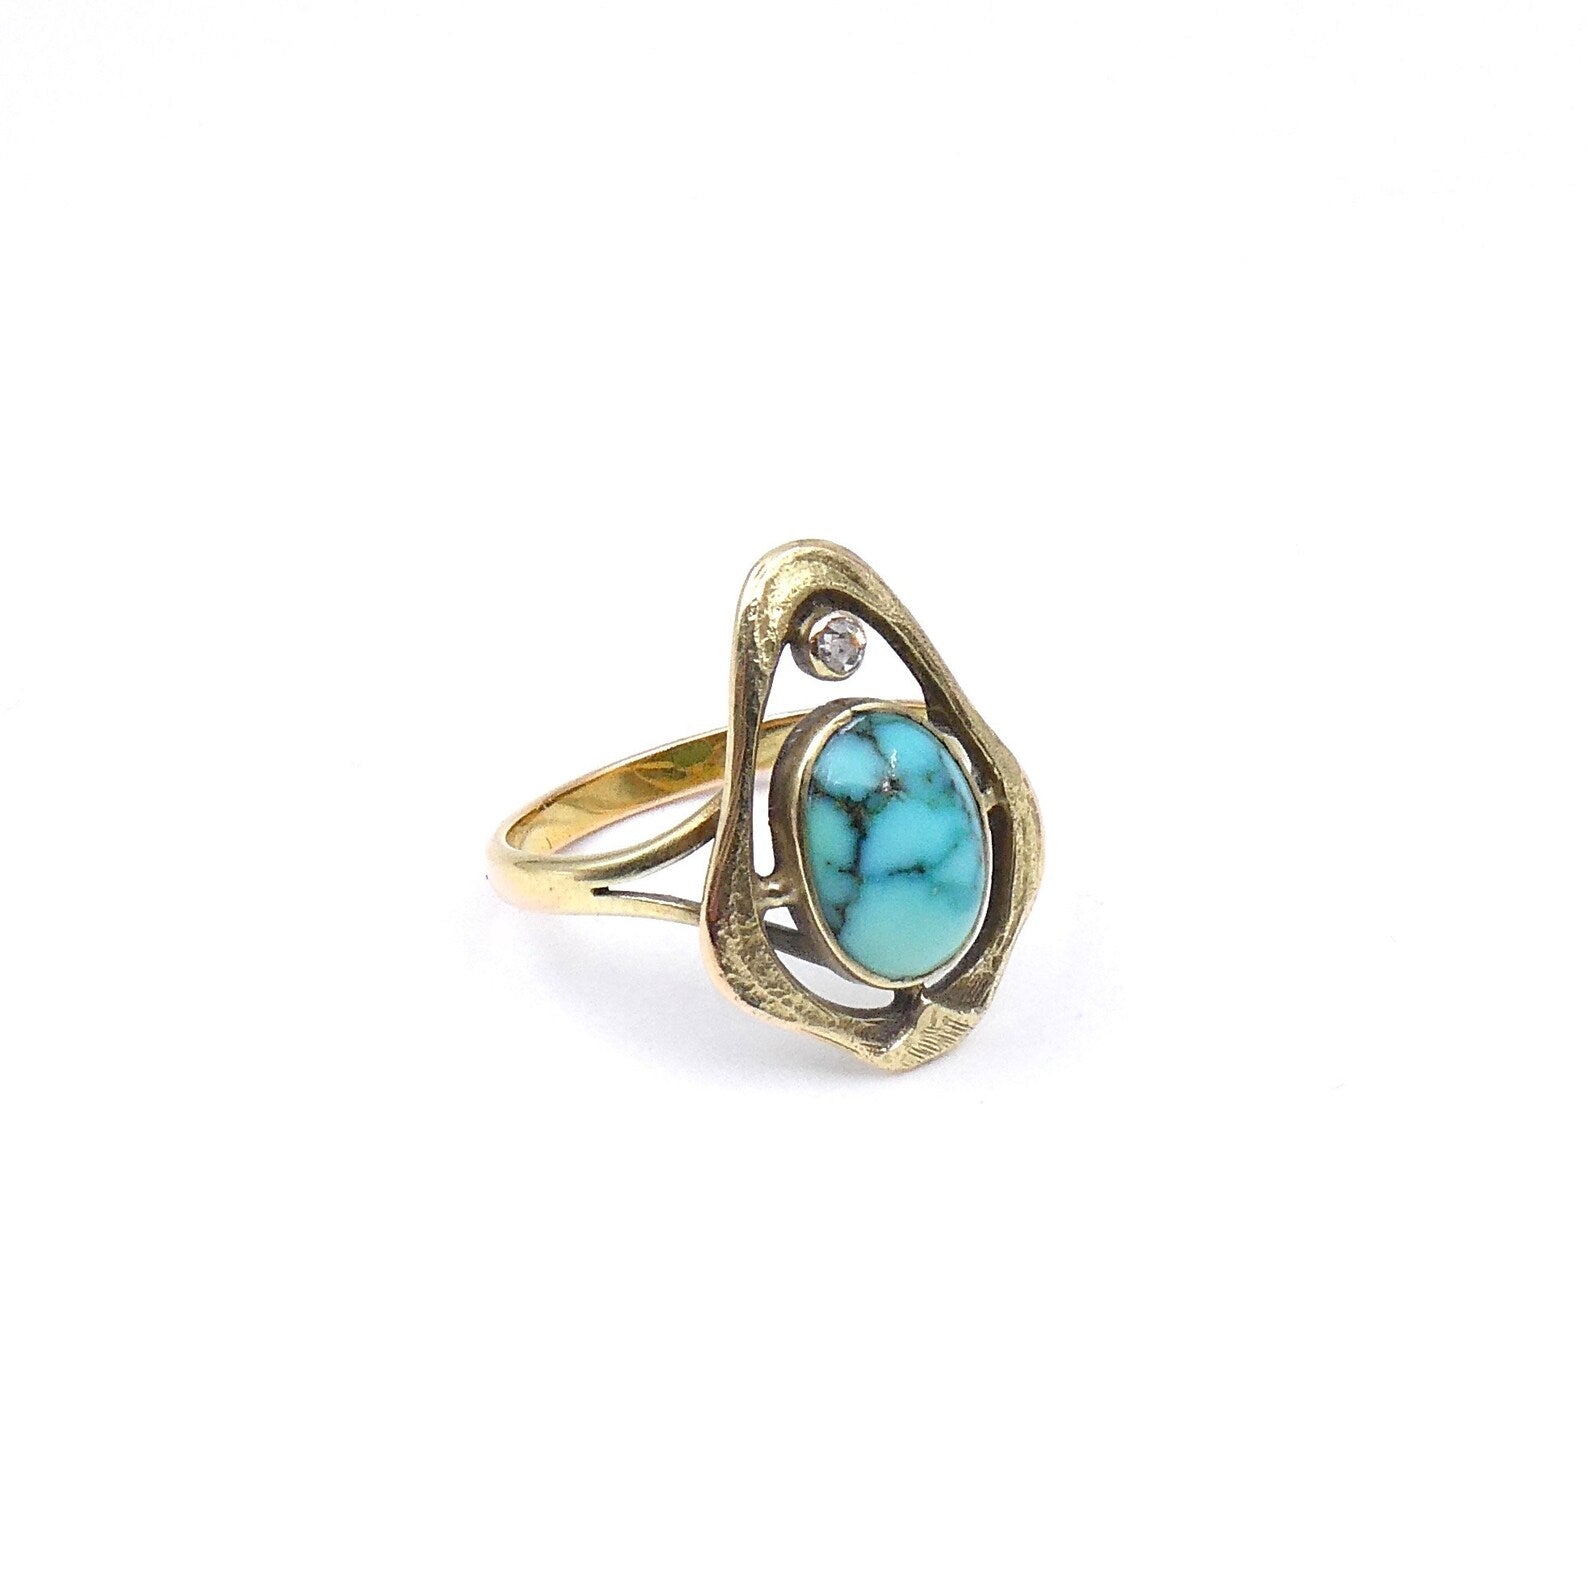 Art Nouveau style ring set with a diamond and turquoise agate, one of a kind ring - Collected